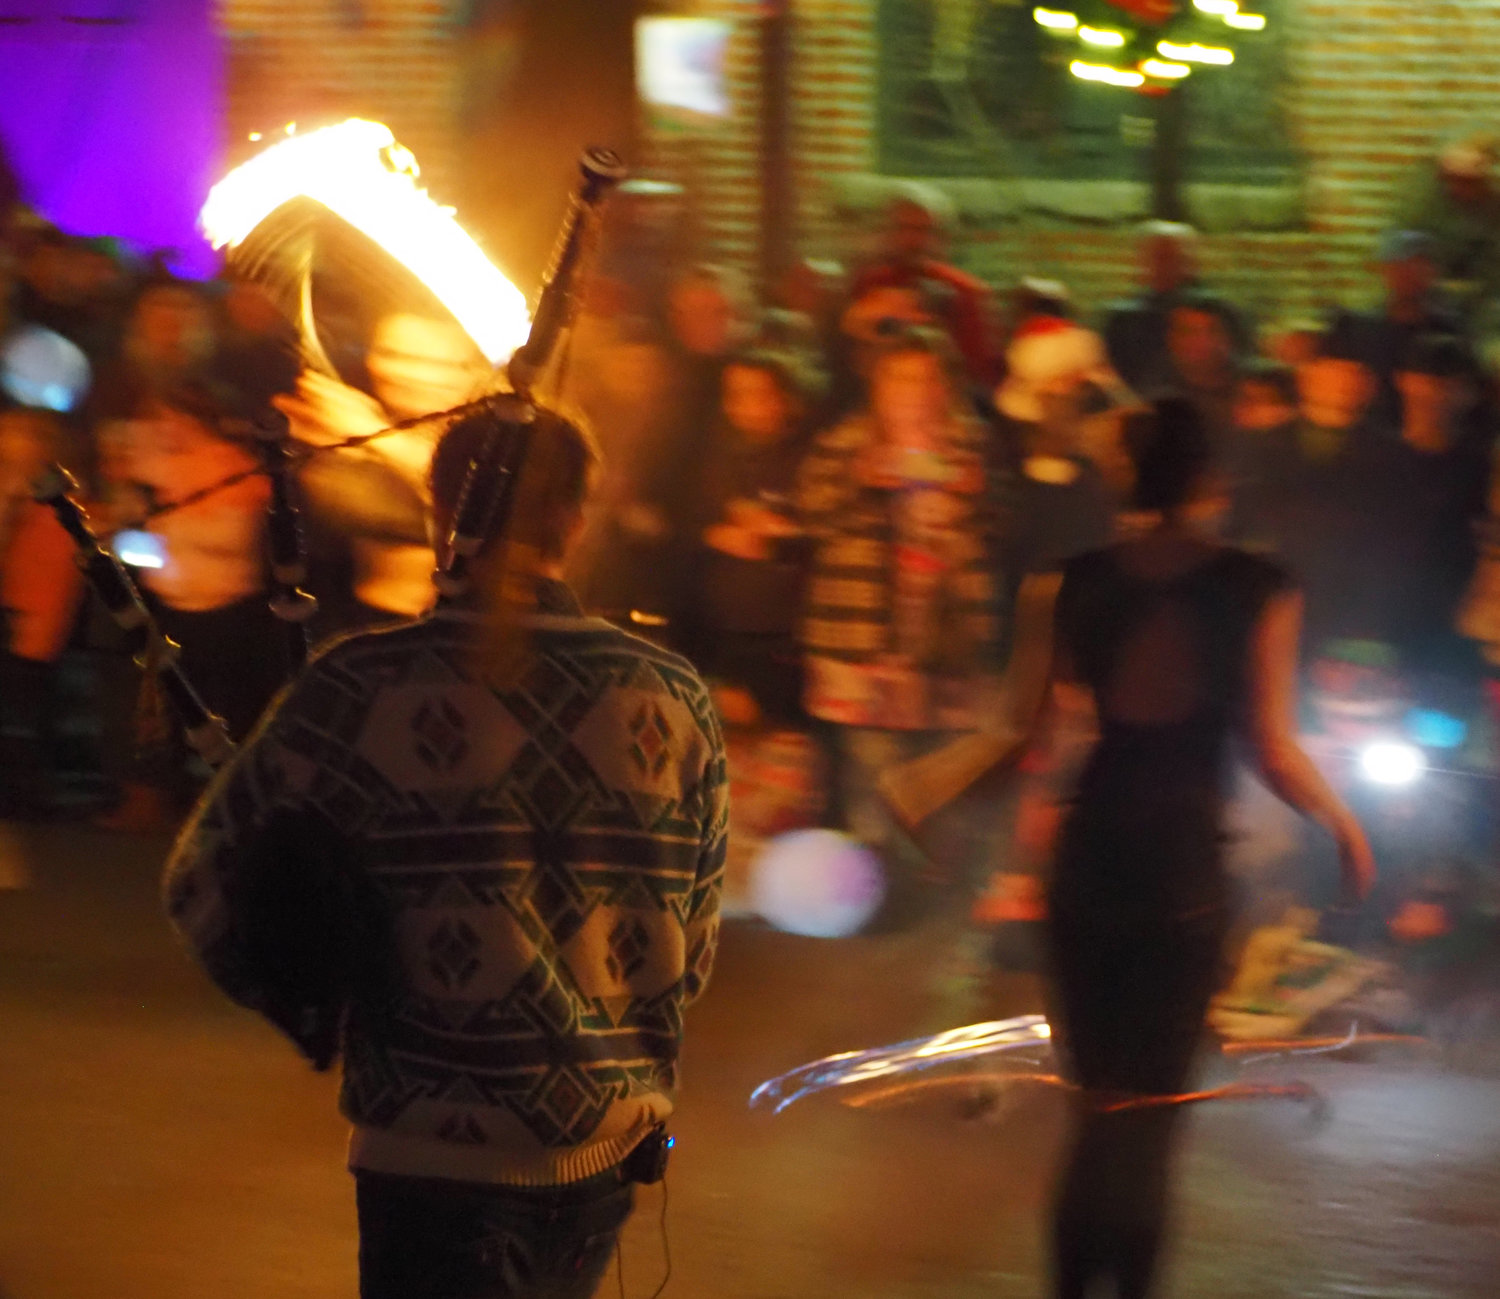 Elias Alexander joined the fire dancers with his bagpipes for one final number, weaving his way around the flames.